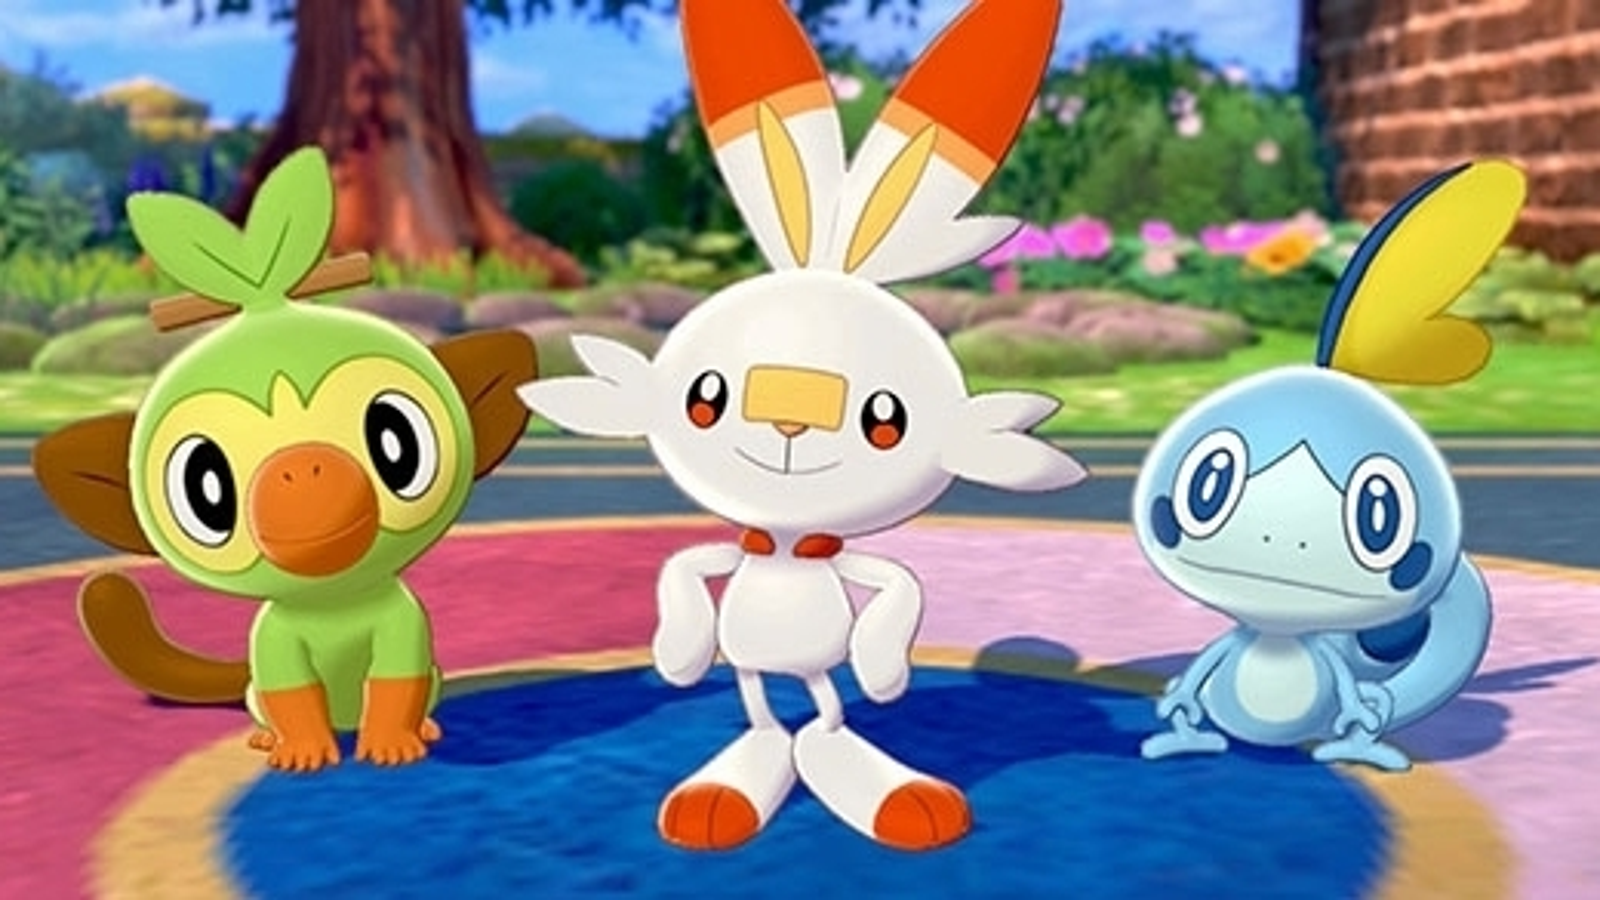 Pokemon Sword & Shield: Where To Find Combo & Ultimate Moves